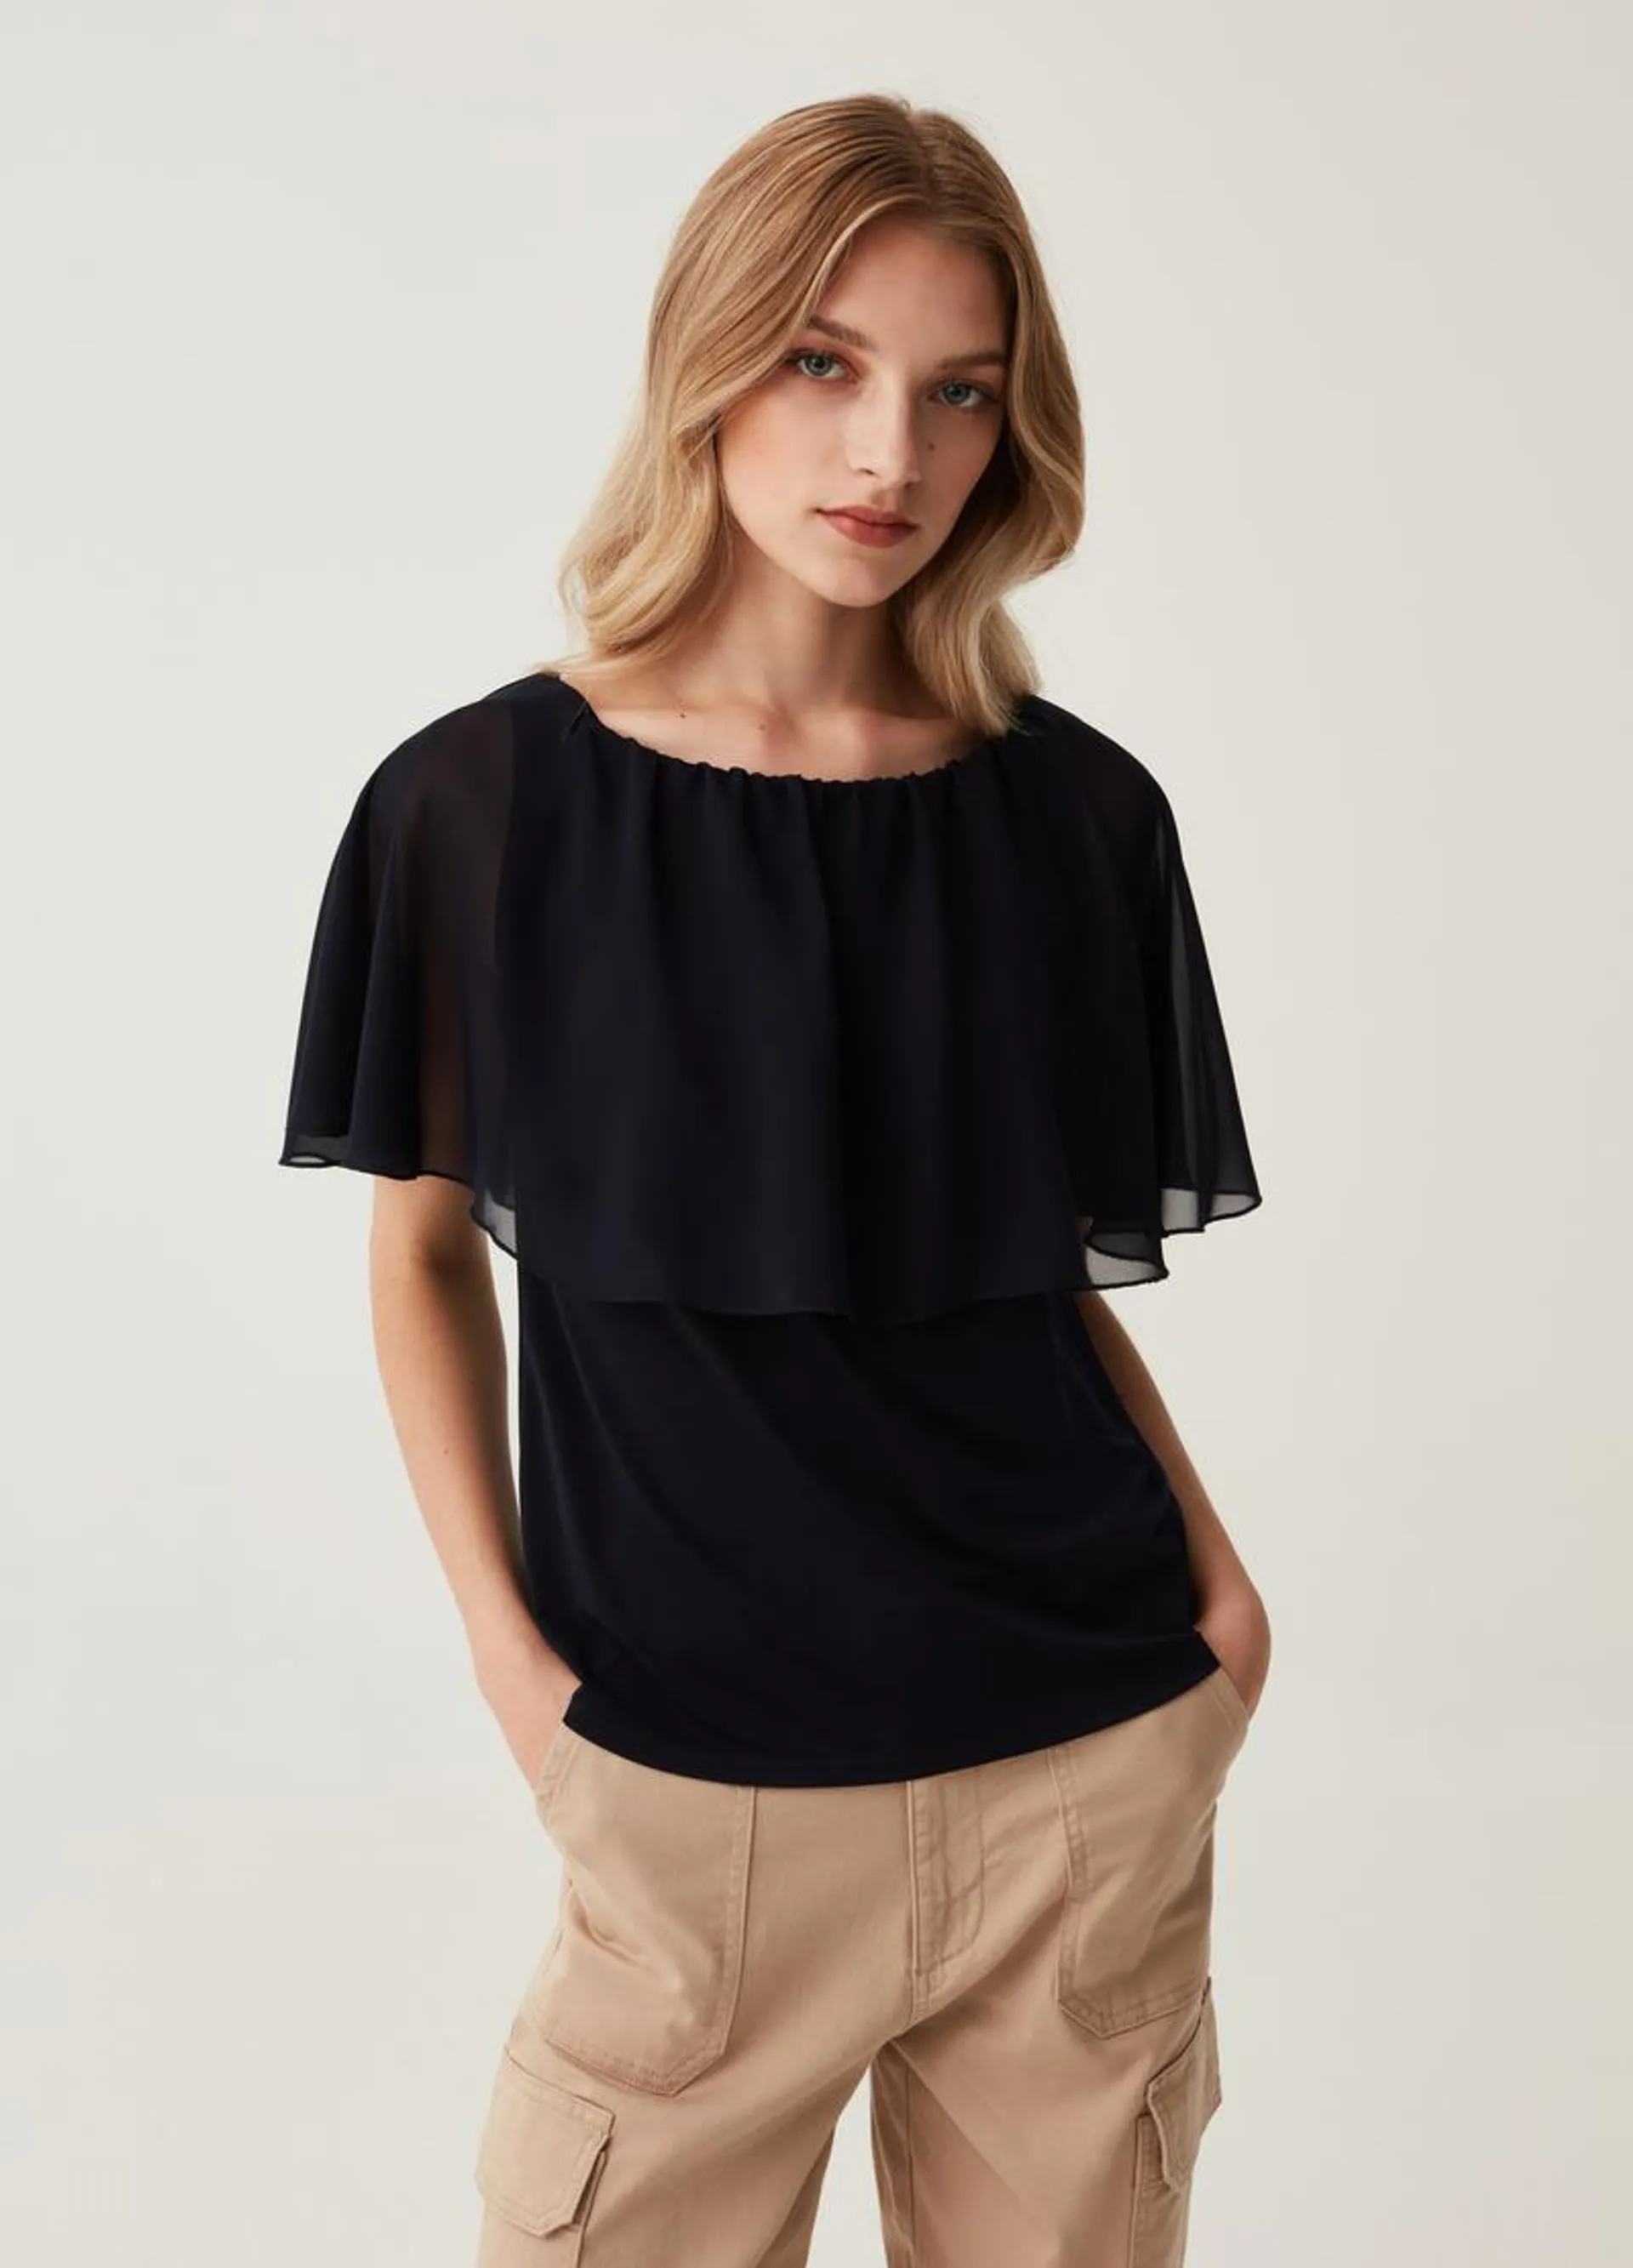 Sleeveless top with georgette flounce